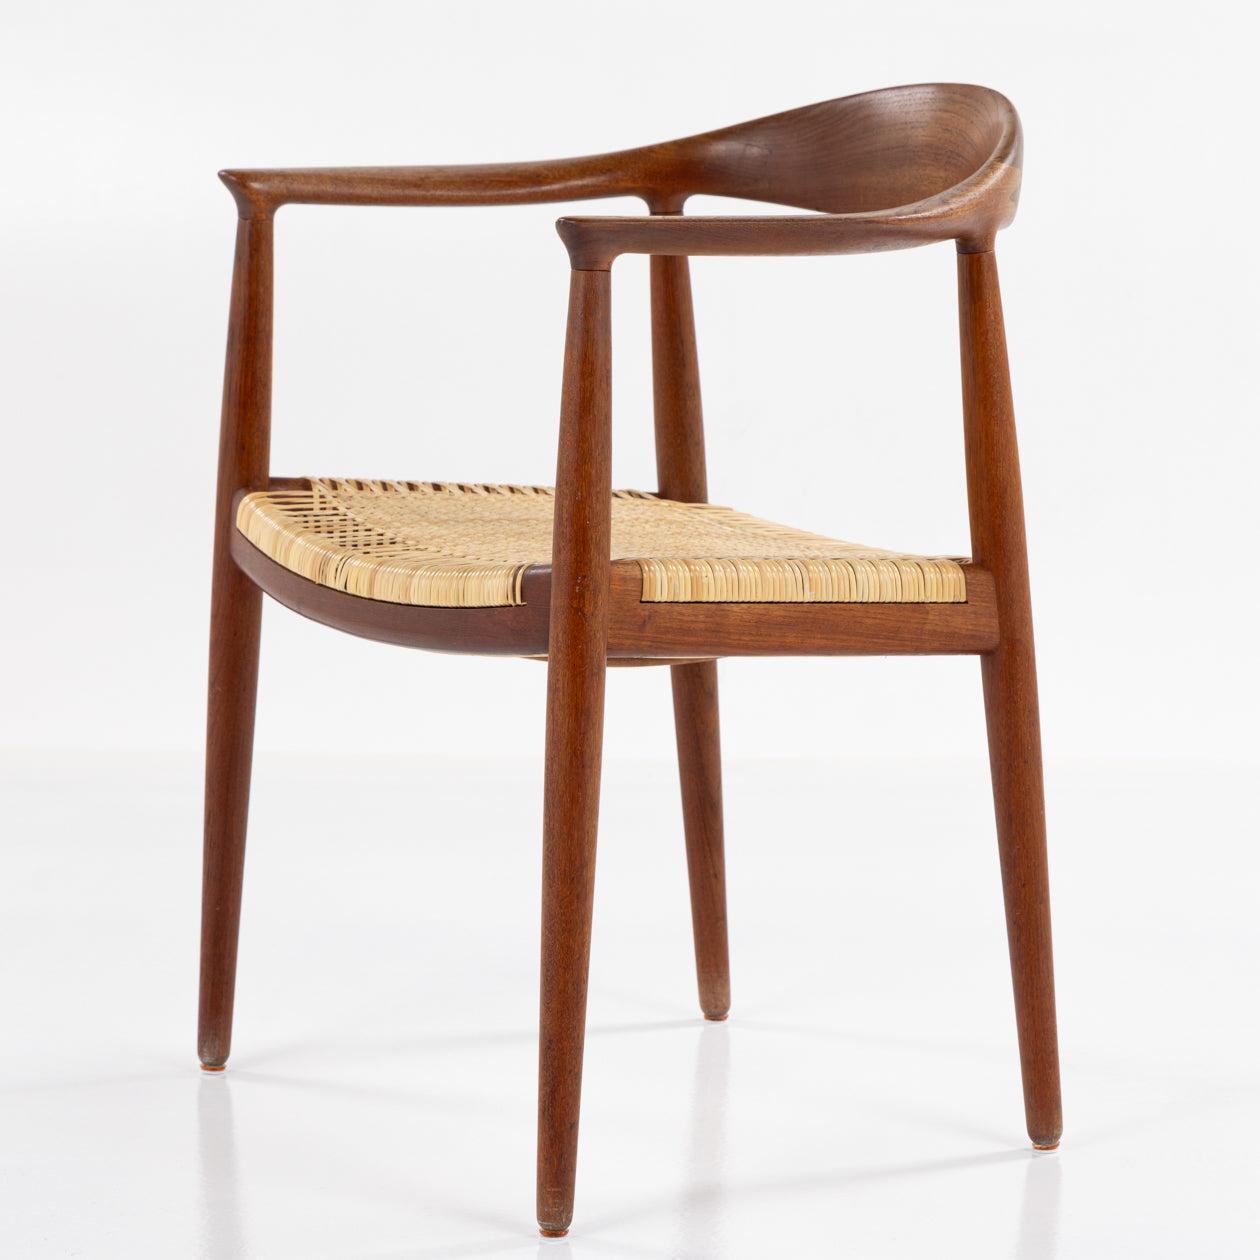 JH 501 - 'The Chair' in solid teak with a newer seat in braided cane. 
Manufactered by Johannes Hansen.